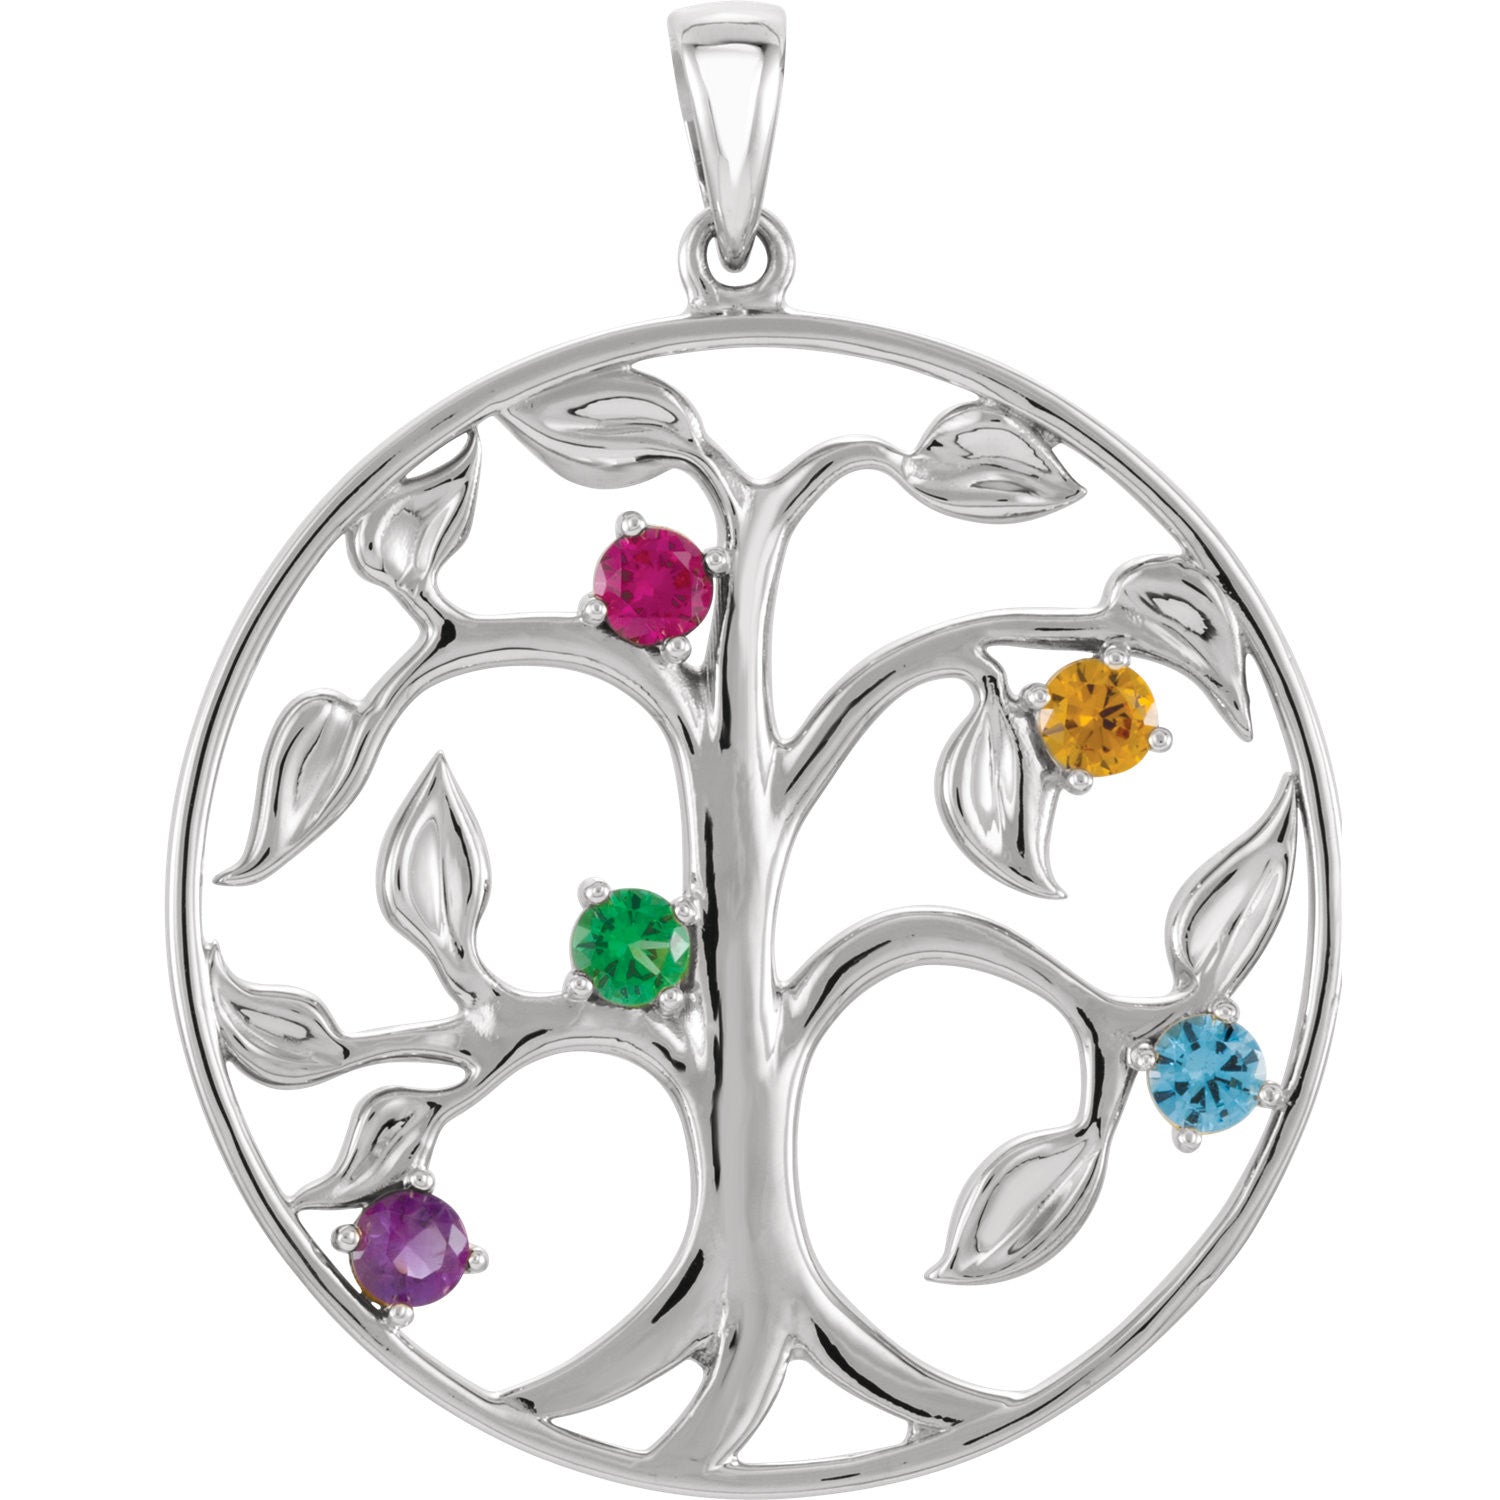 Up To 81% Off on 7 Chakra Healing Crystal Neck... | Groupon Goods